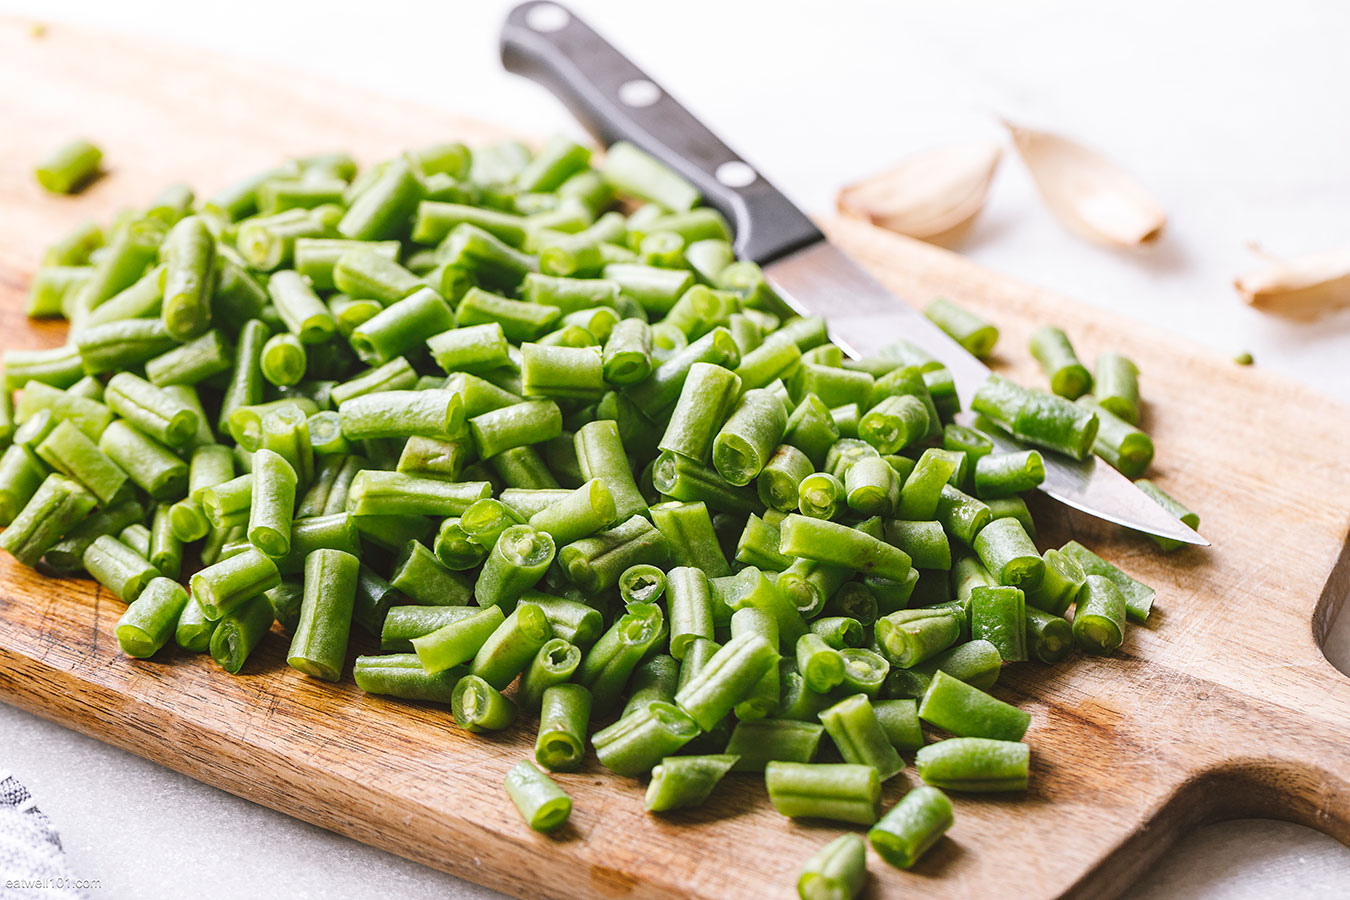 How do you cut and cook green beans